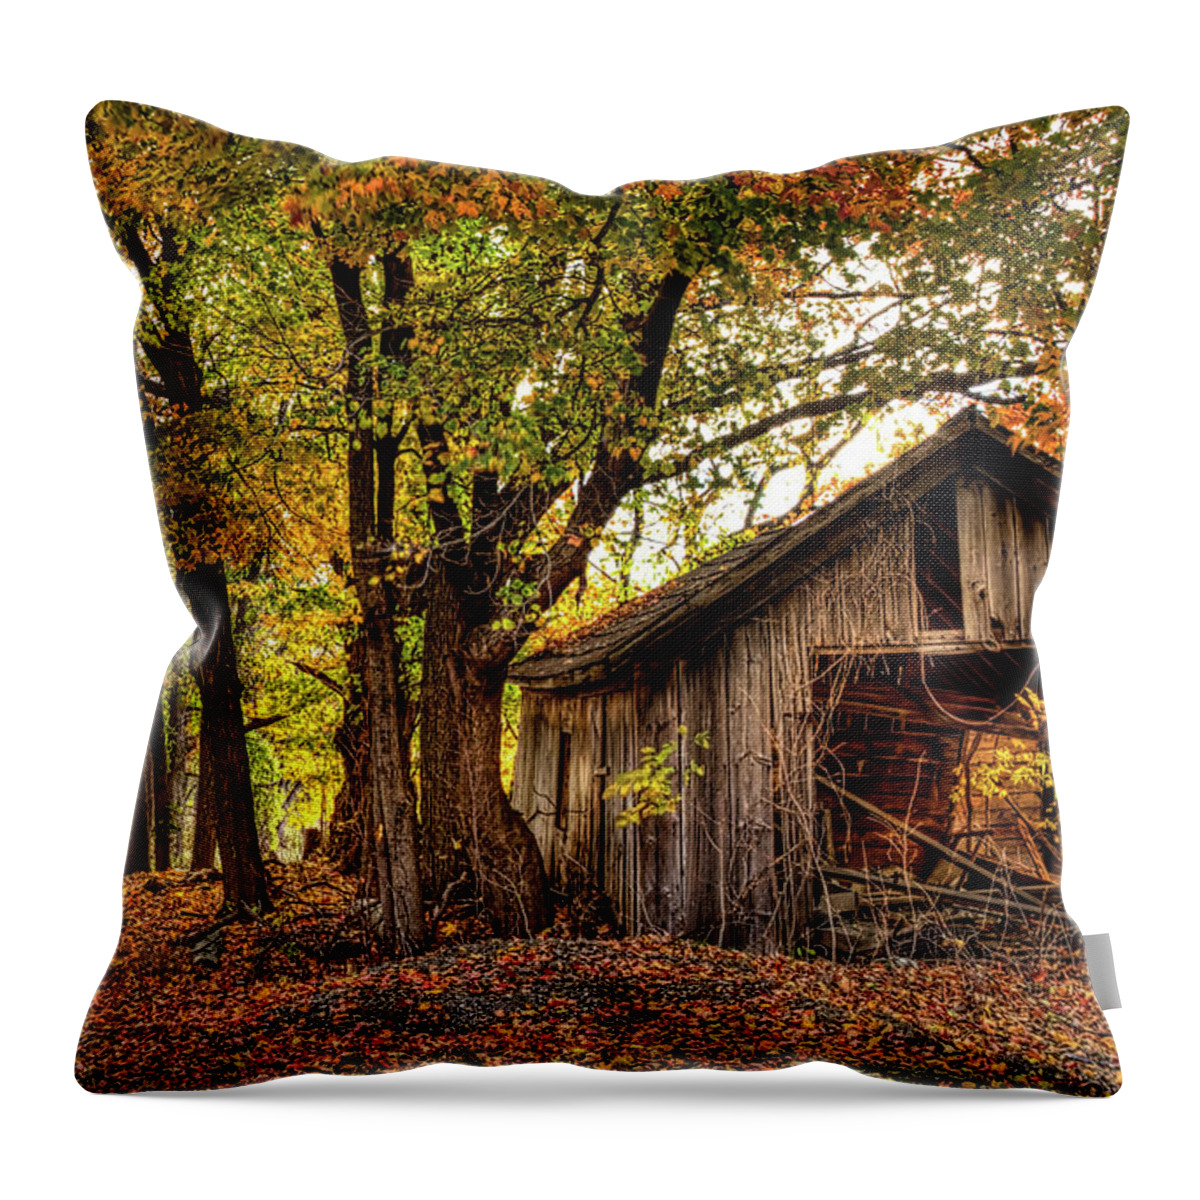 Hdr Photography Throw Pillow featuring the photograph Old Autumn Shed by Richard Gregurich